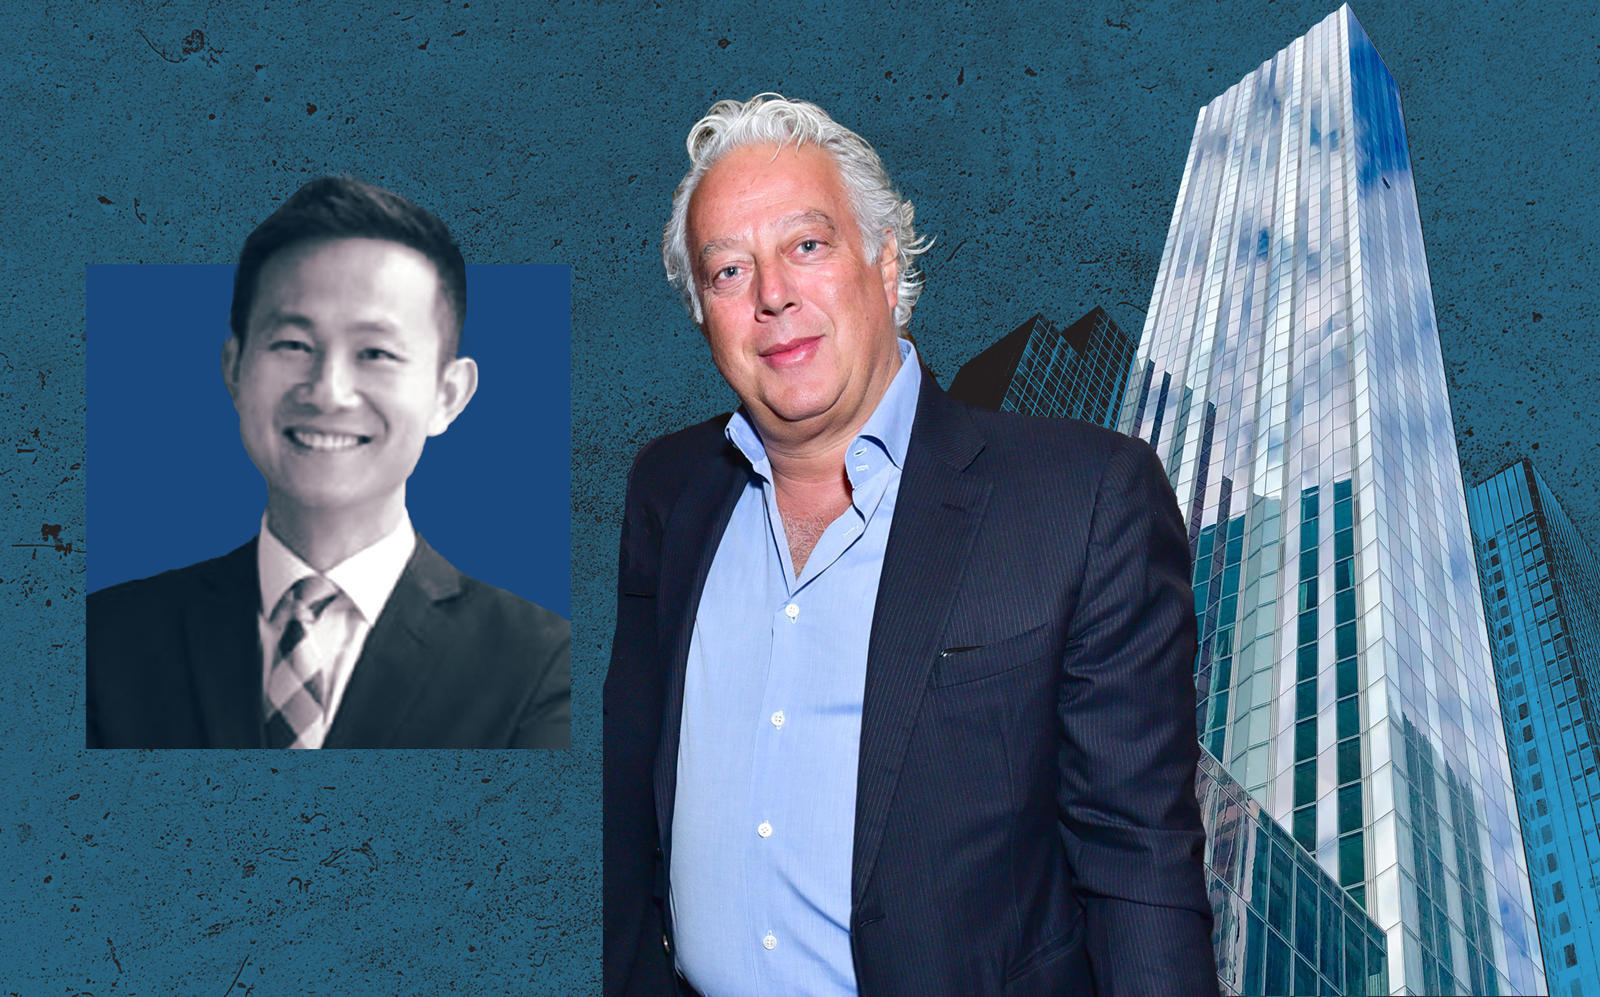 Vanke US managing director Kai-yan Lee, RFR’s Aby Rosen and 100 East 53rd Street (Photos via Foster + Partners and Getty)